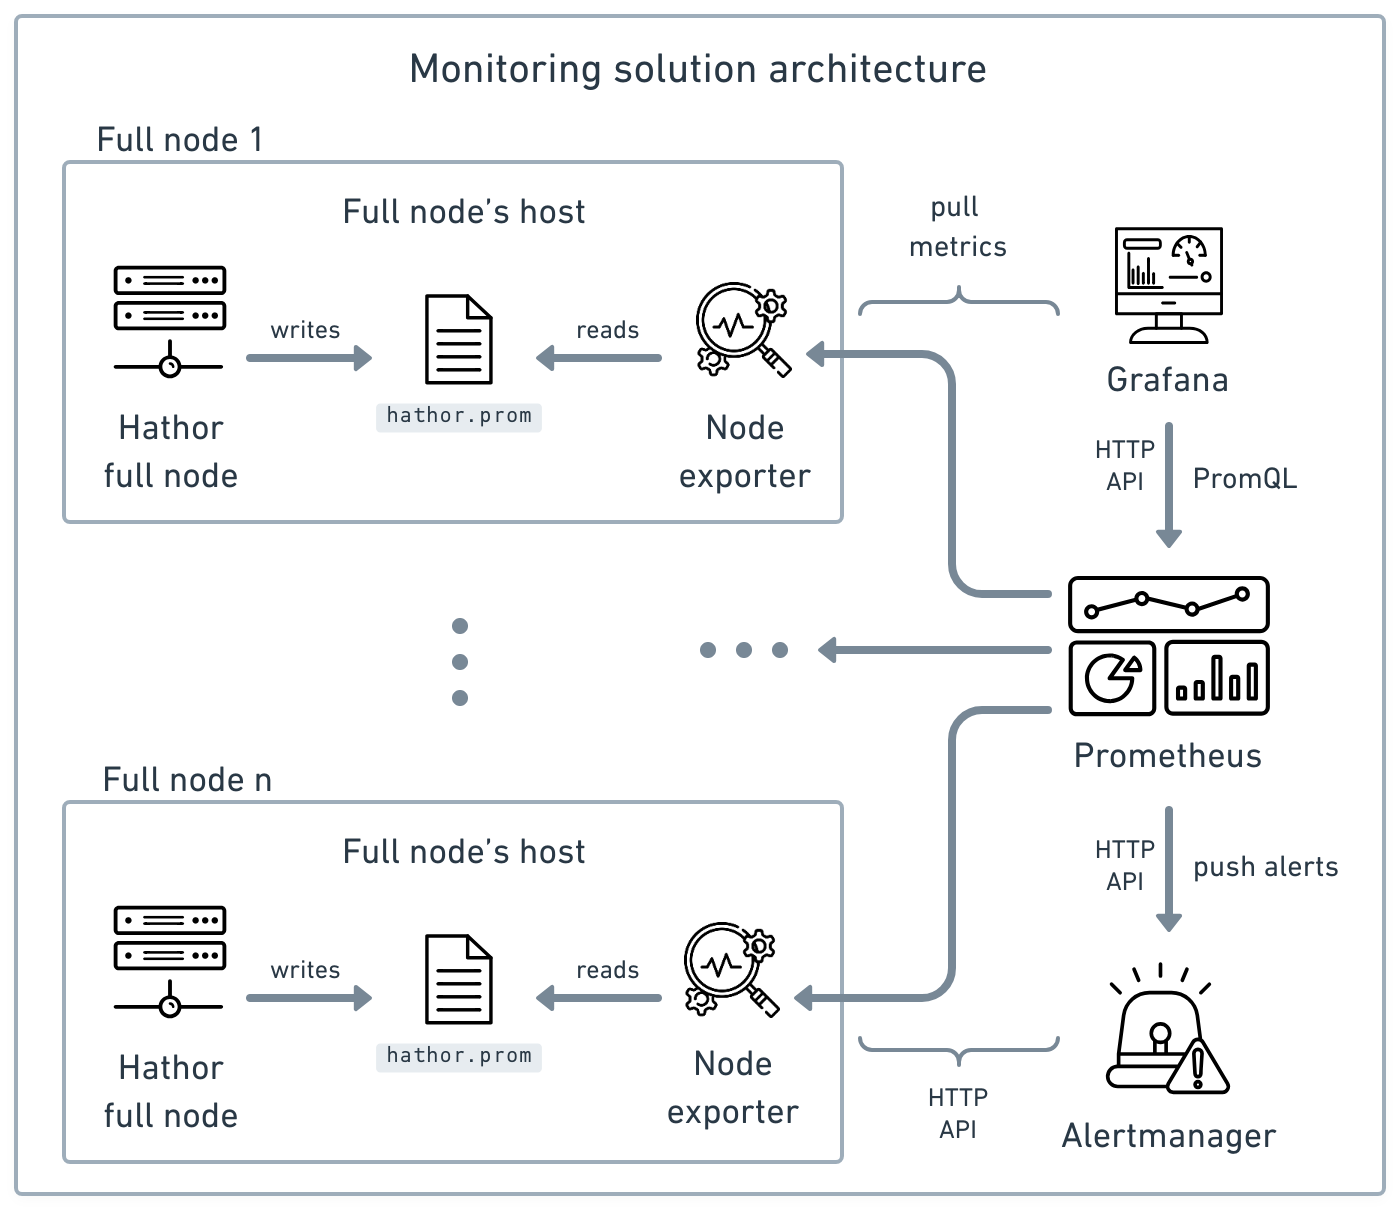 Suggested monitoring solution architecture